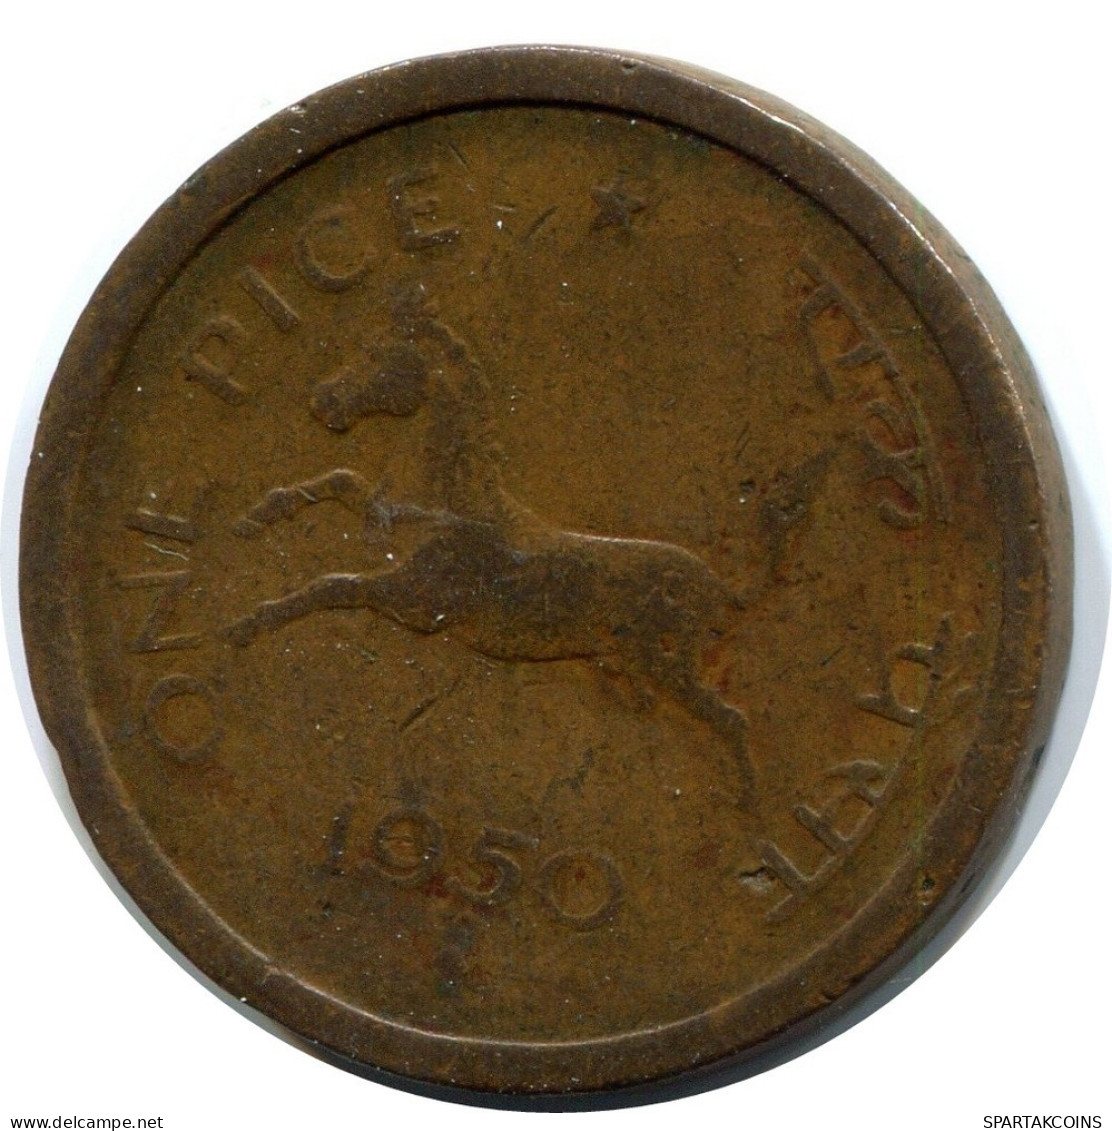 1 PICE 1950 INDIEN INDIA Münze #AY949.D.A - Inde